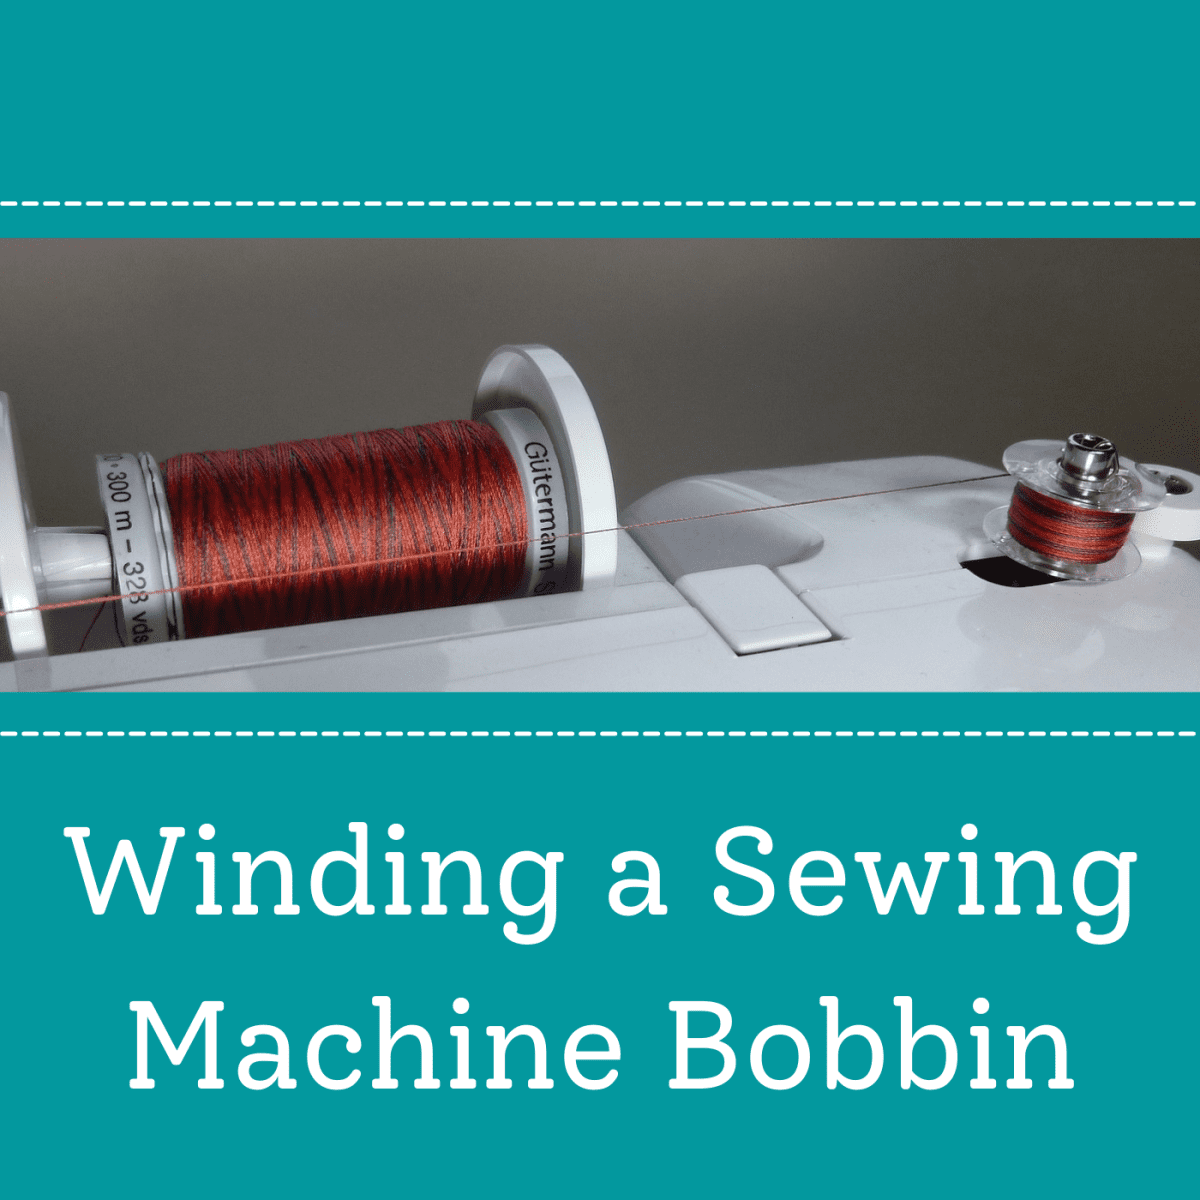 How to Wind a Sewing Machine Bobbin in Five Easy Steps - FeltMagnet